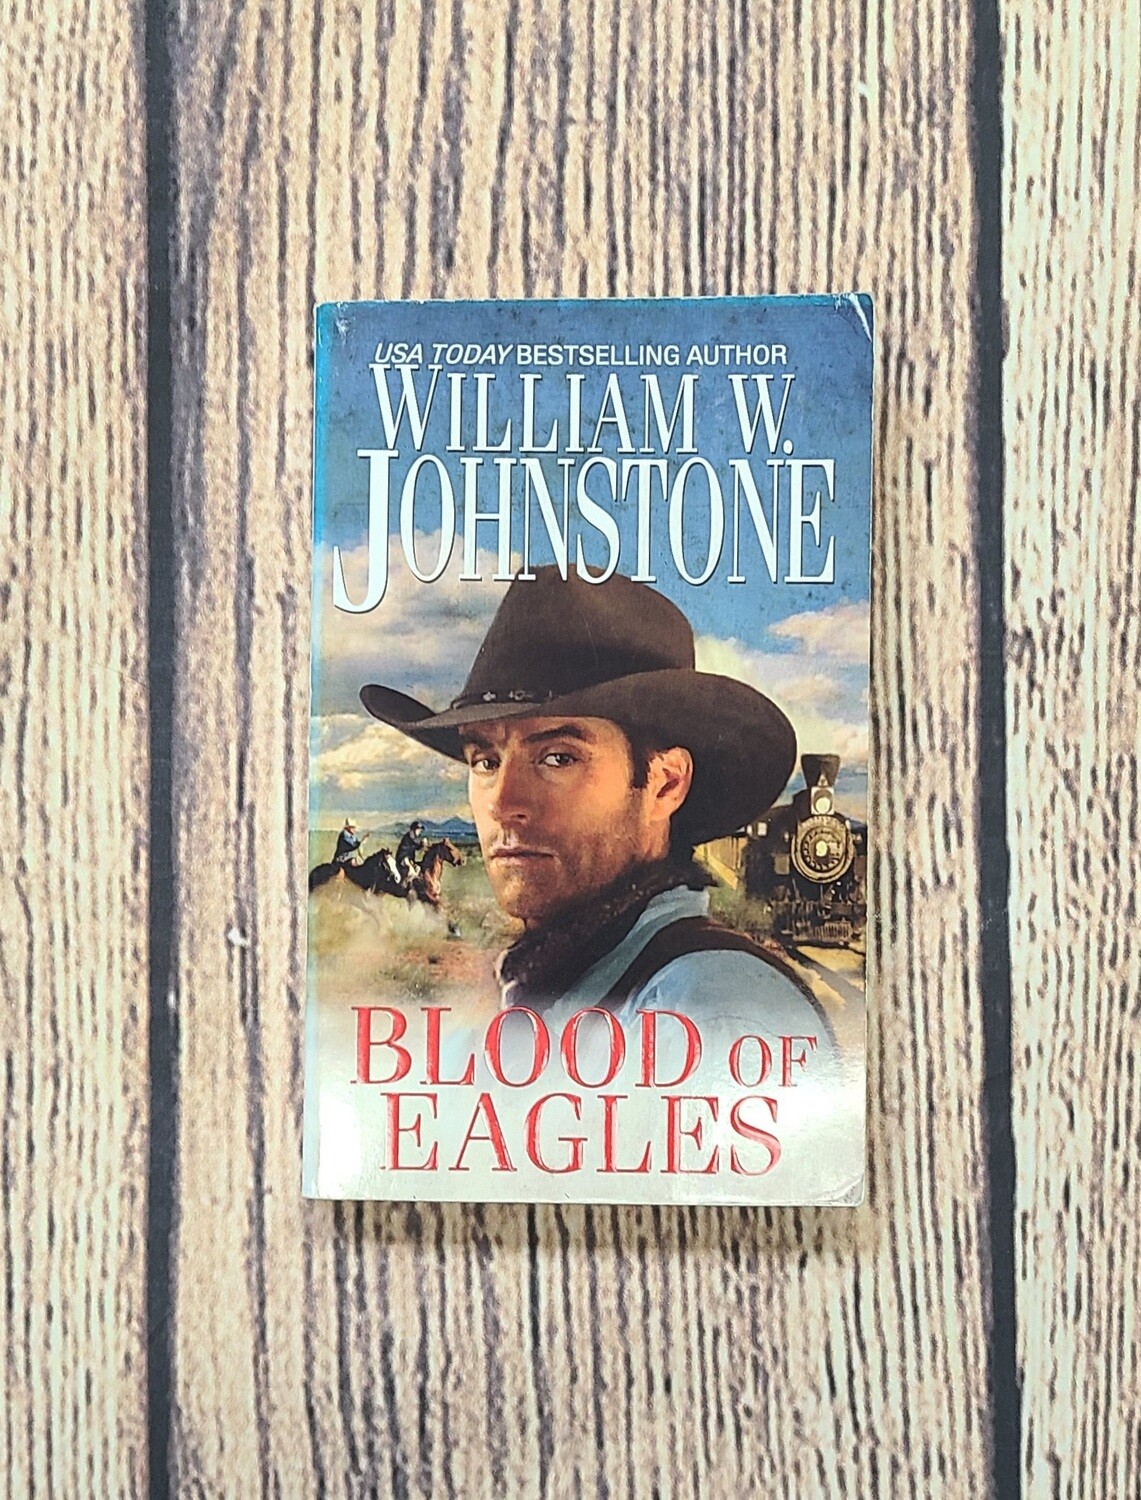 Blood of Eagles by William W. Johnstone